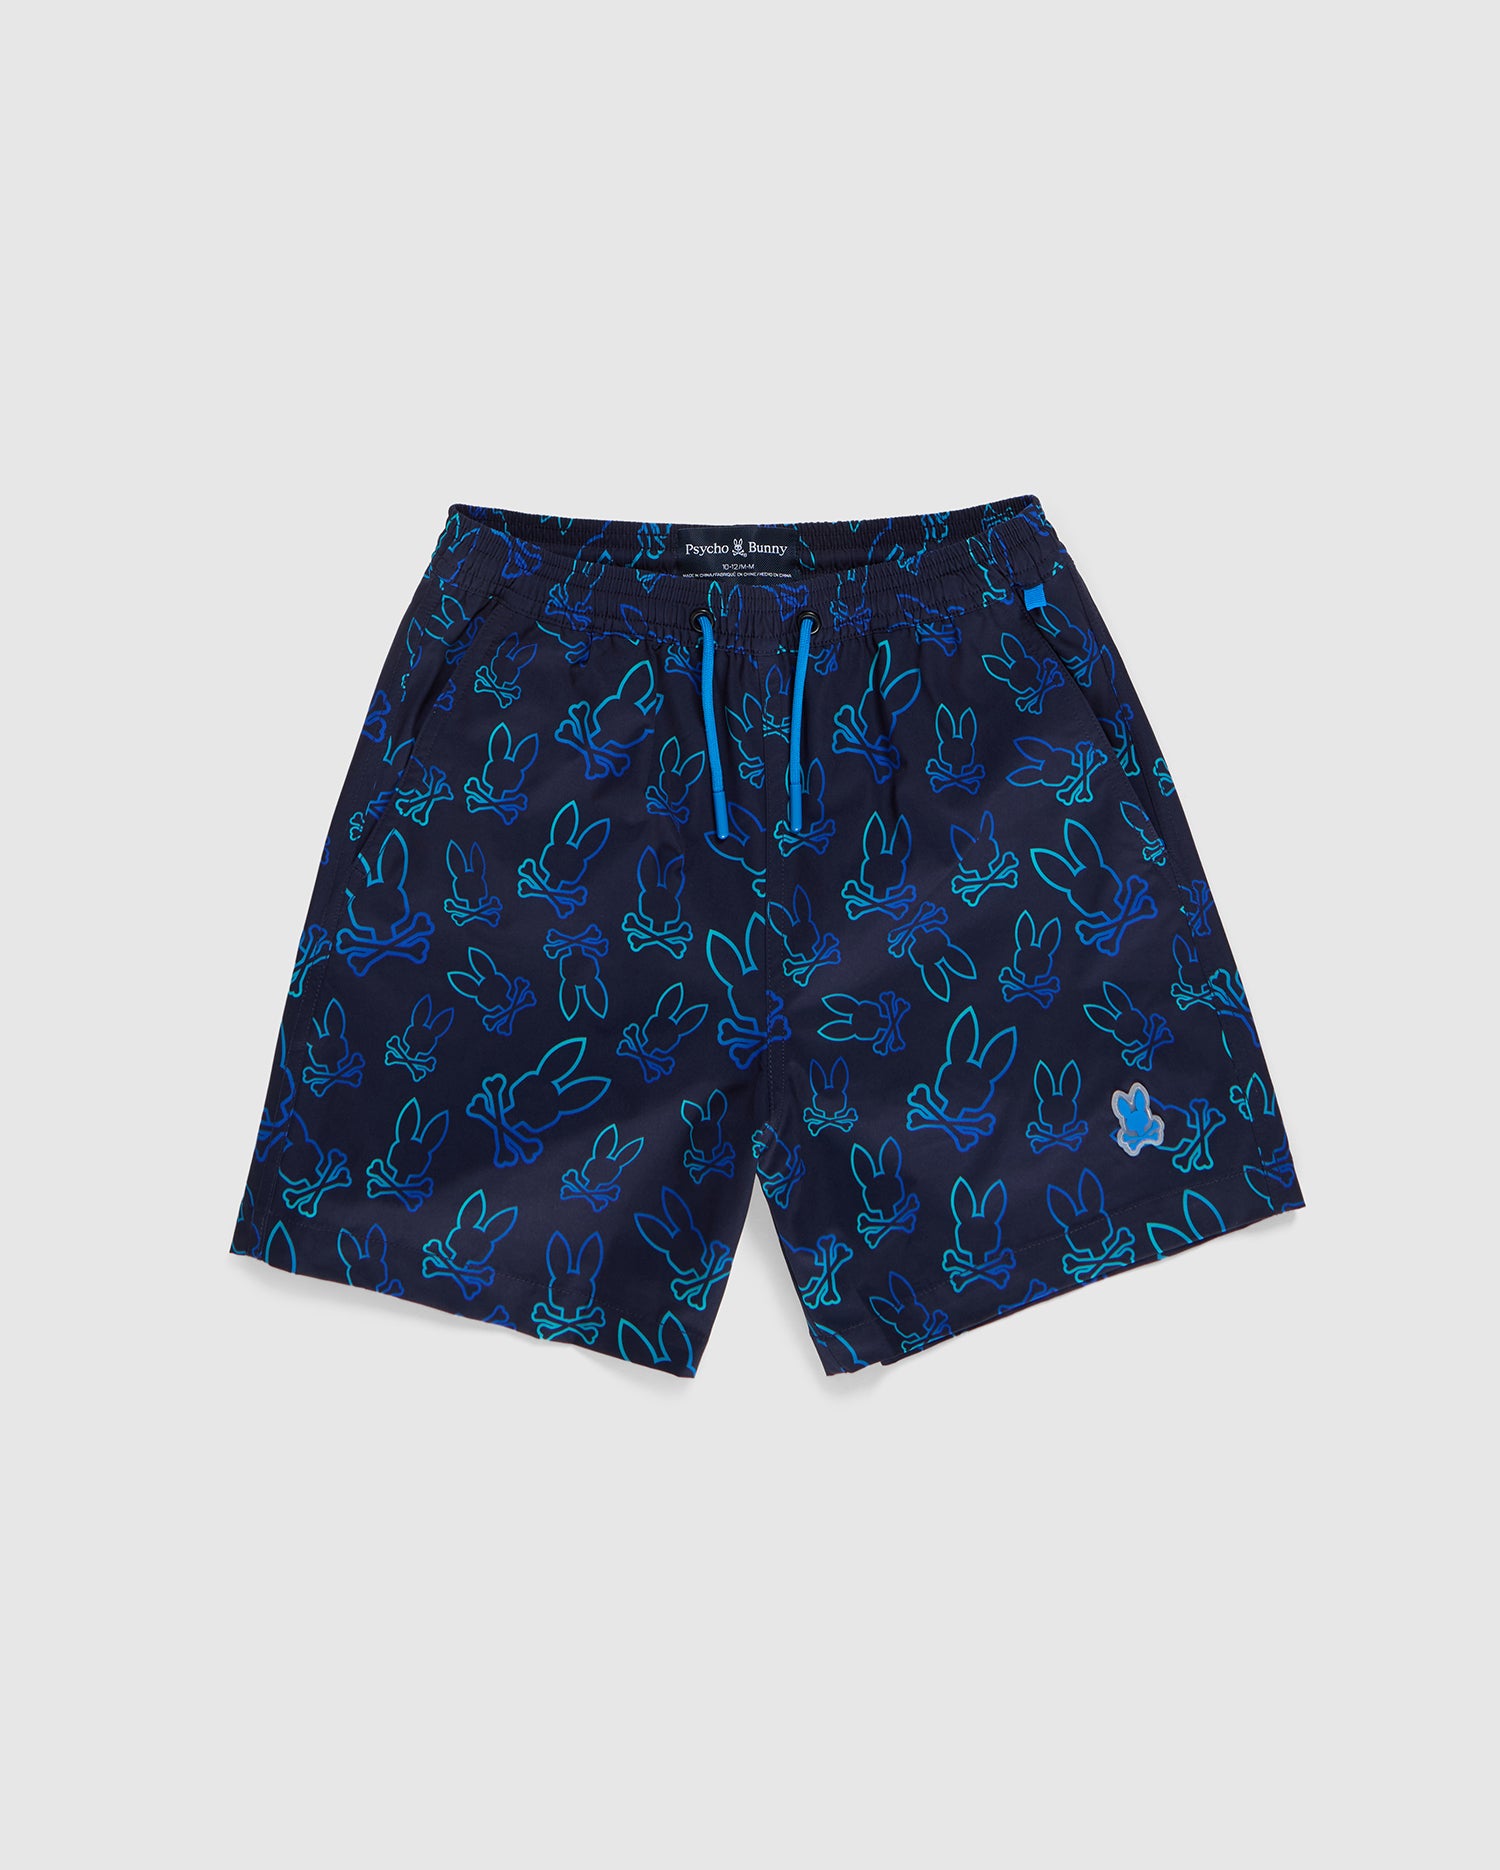 A pair of KIDS SHELDON ALL OVER PRINT SWIM TRUNK - B0W588C200 by Psycho Bunny featuring a vibrant bunny pattern of light blue and teal outlined bunnies in various playful positions. The quick-dry fabric shorts have an elastic waistband with an adjustable drawstring.